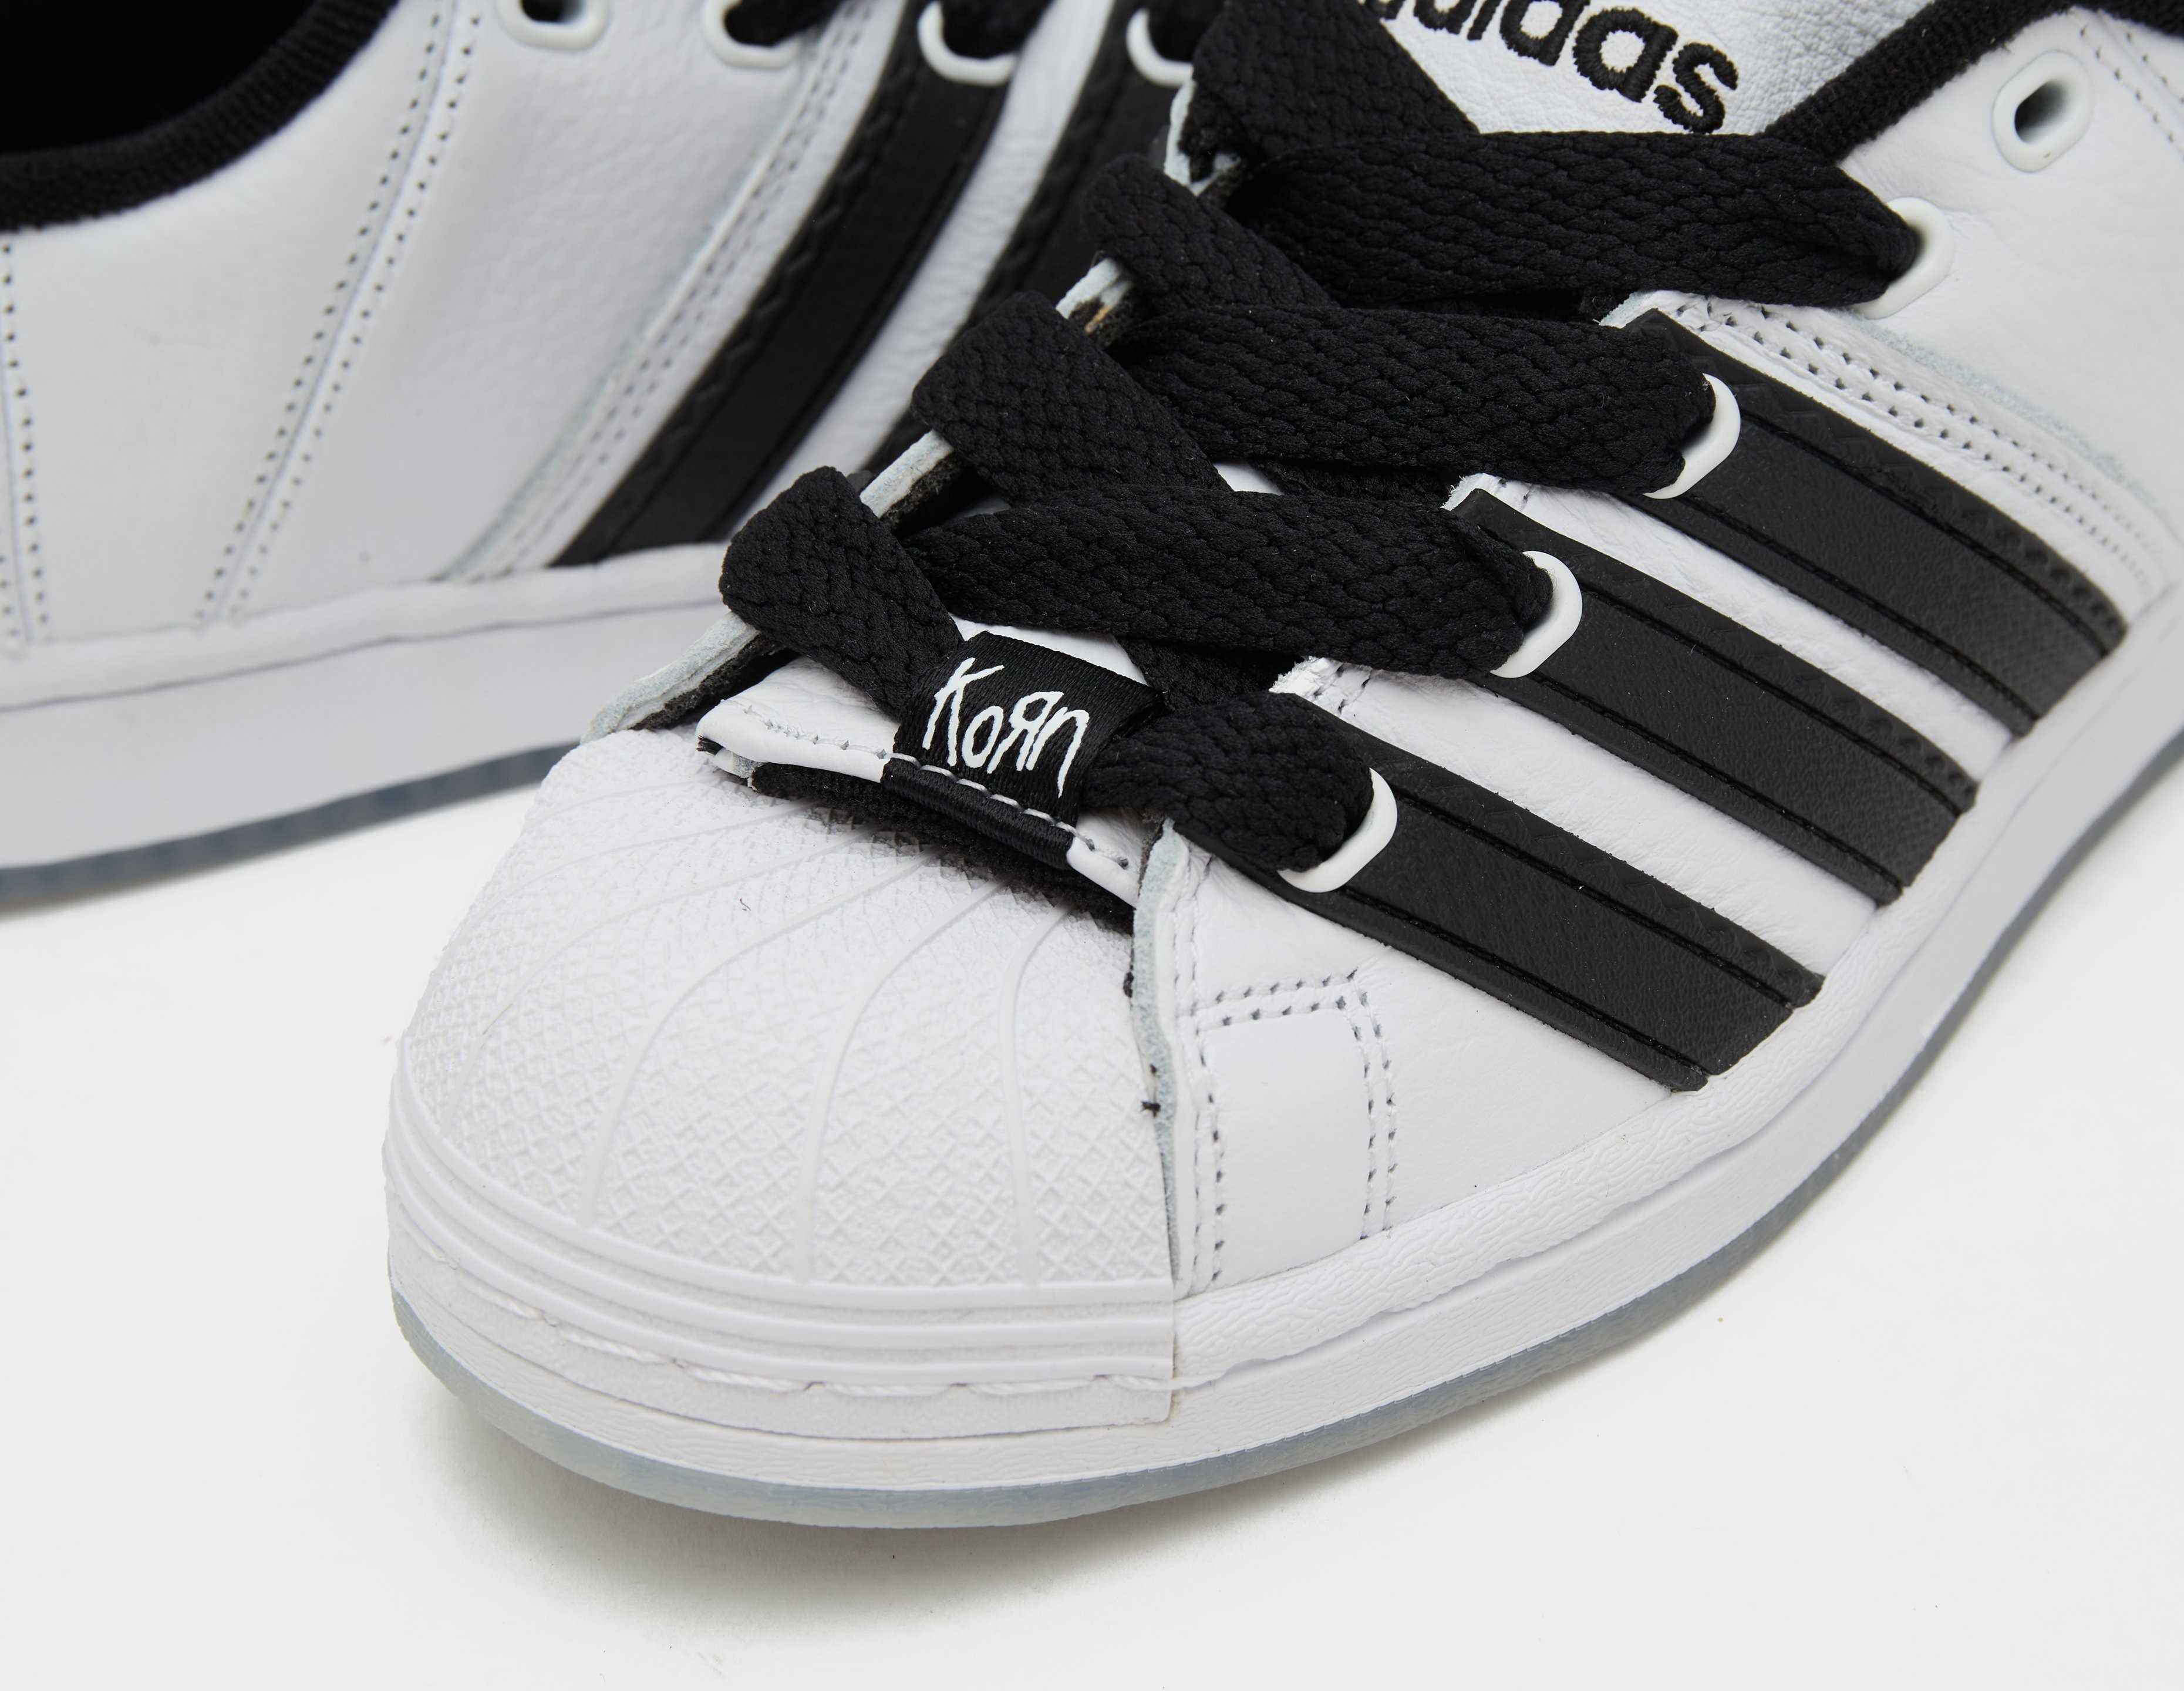 Korn x Adidas Superstar Supermodified - Limited Edition